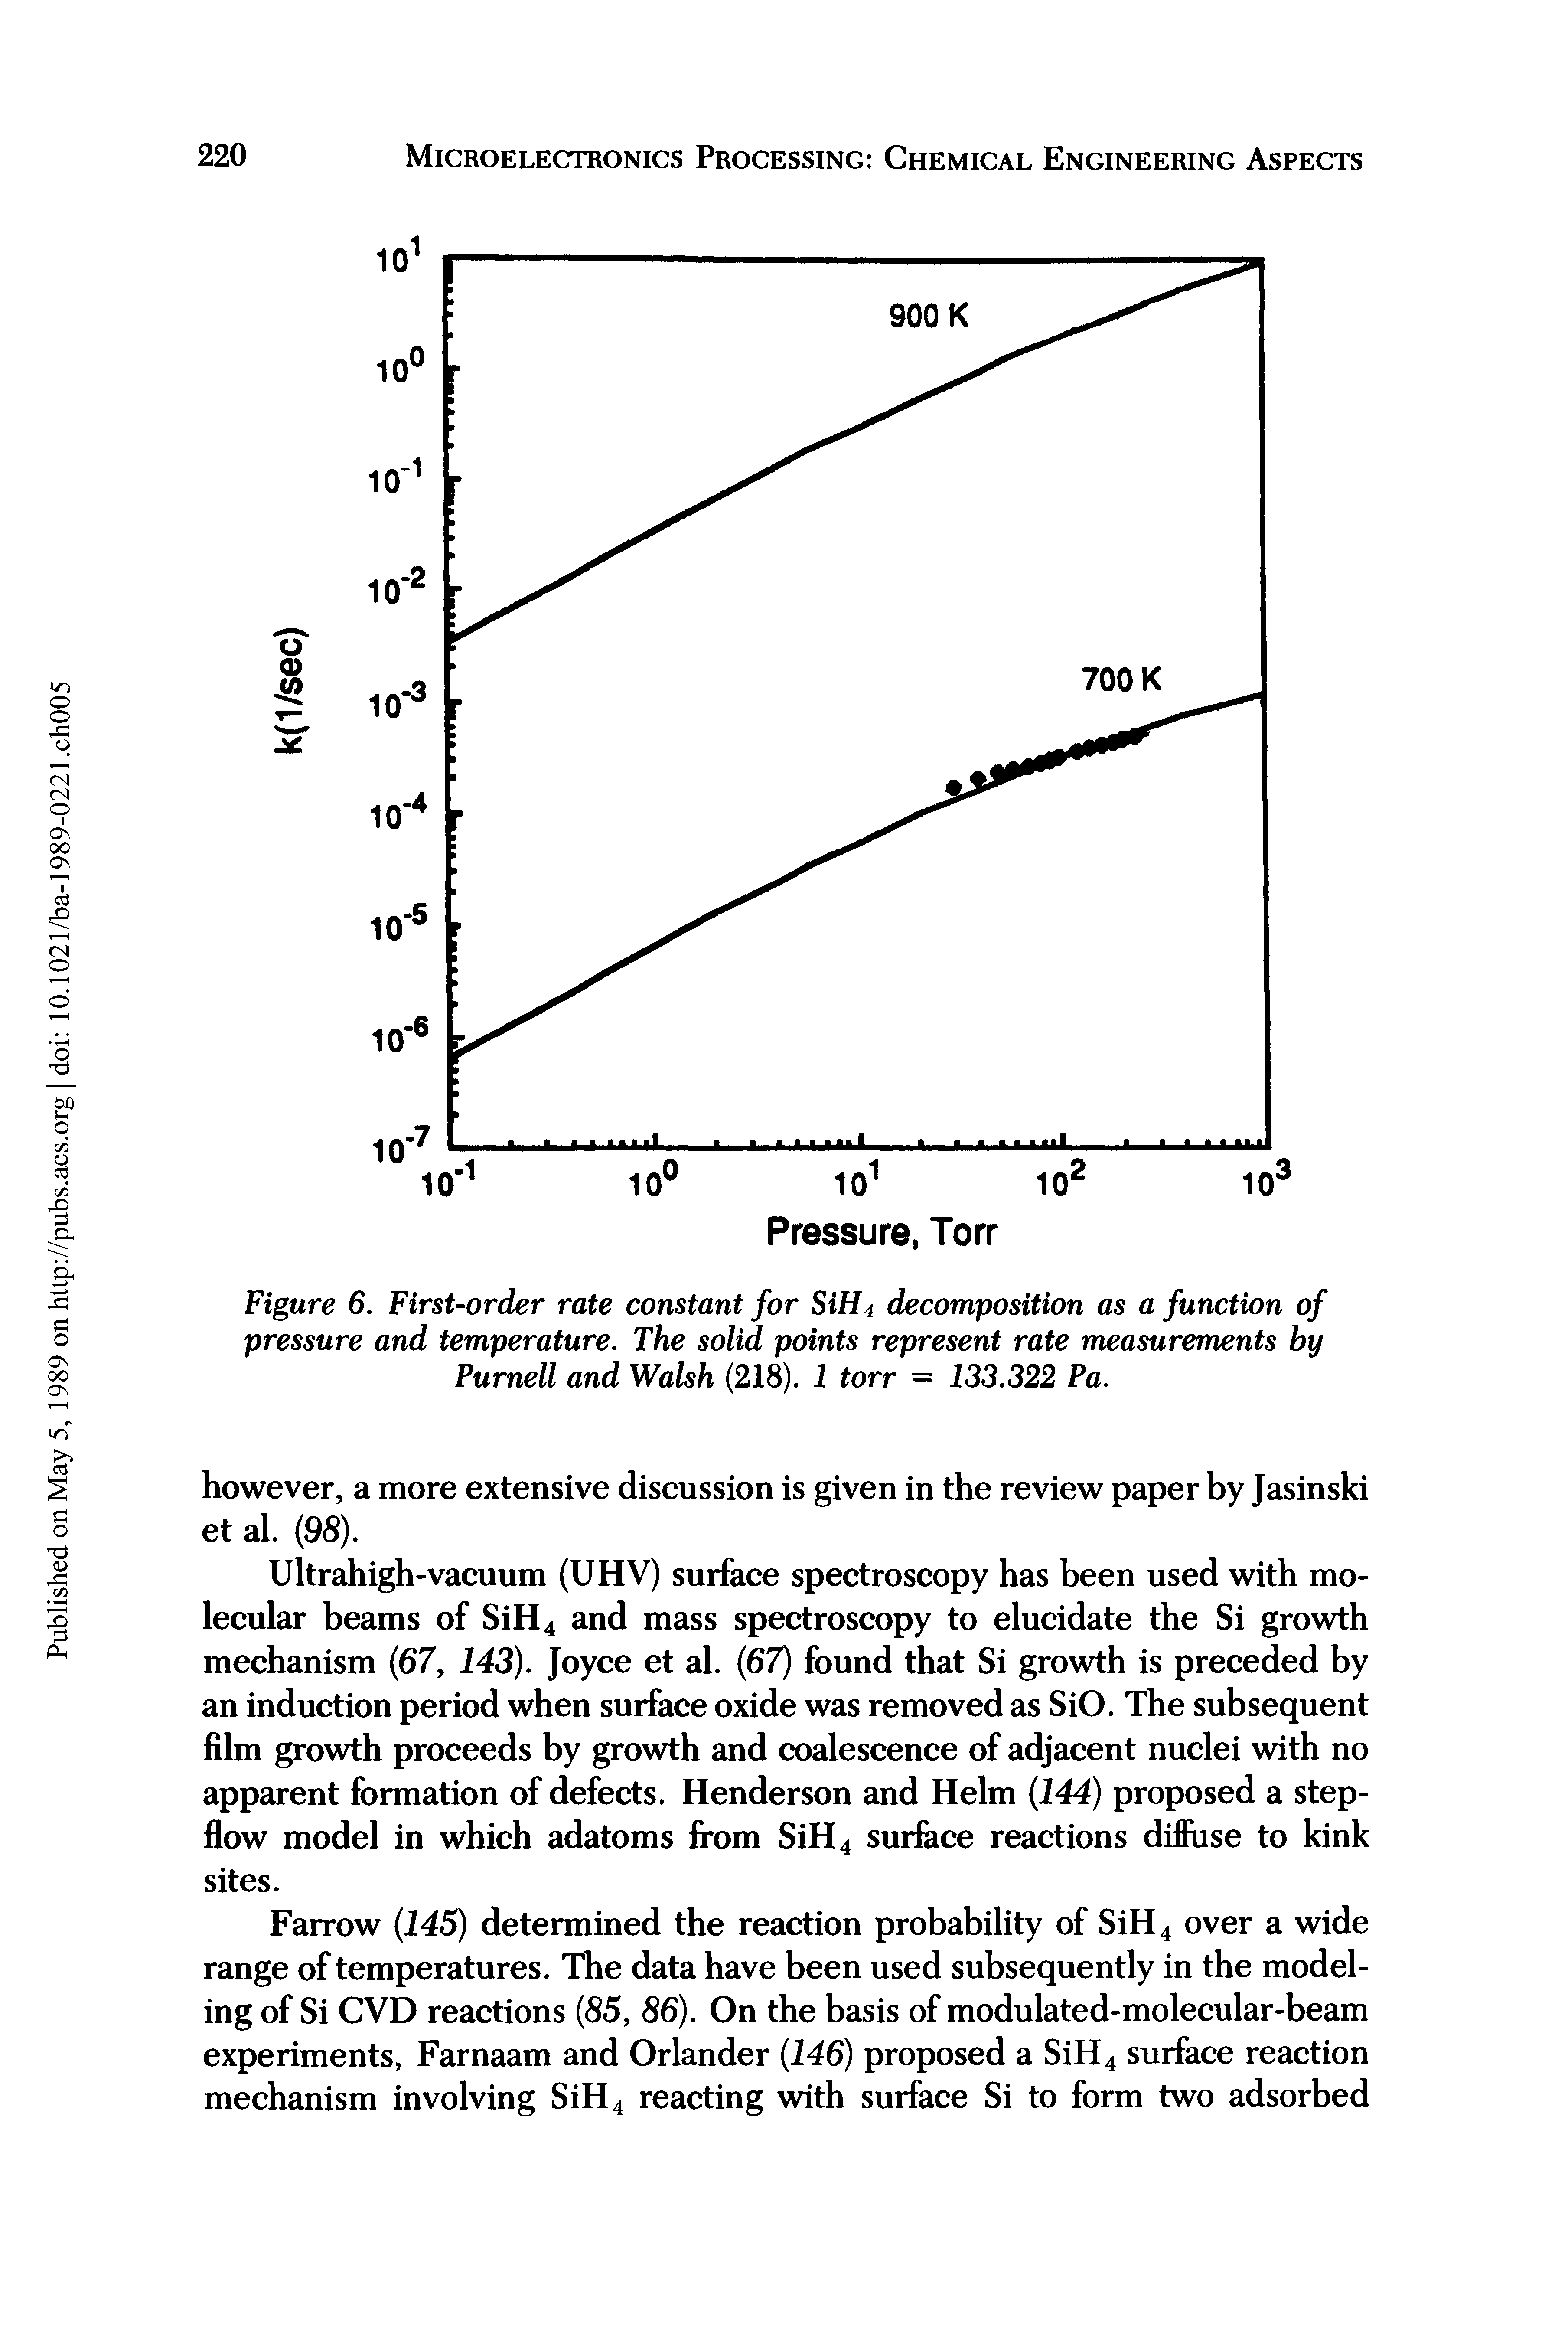 Figure 6. First-order rate constant for SiH4 decomposition as a function of pressure and temperature. The solid points represent rate measurements by Purnell and Walsh (218). 1 torr = 133.322 Pa.